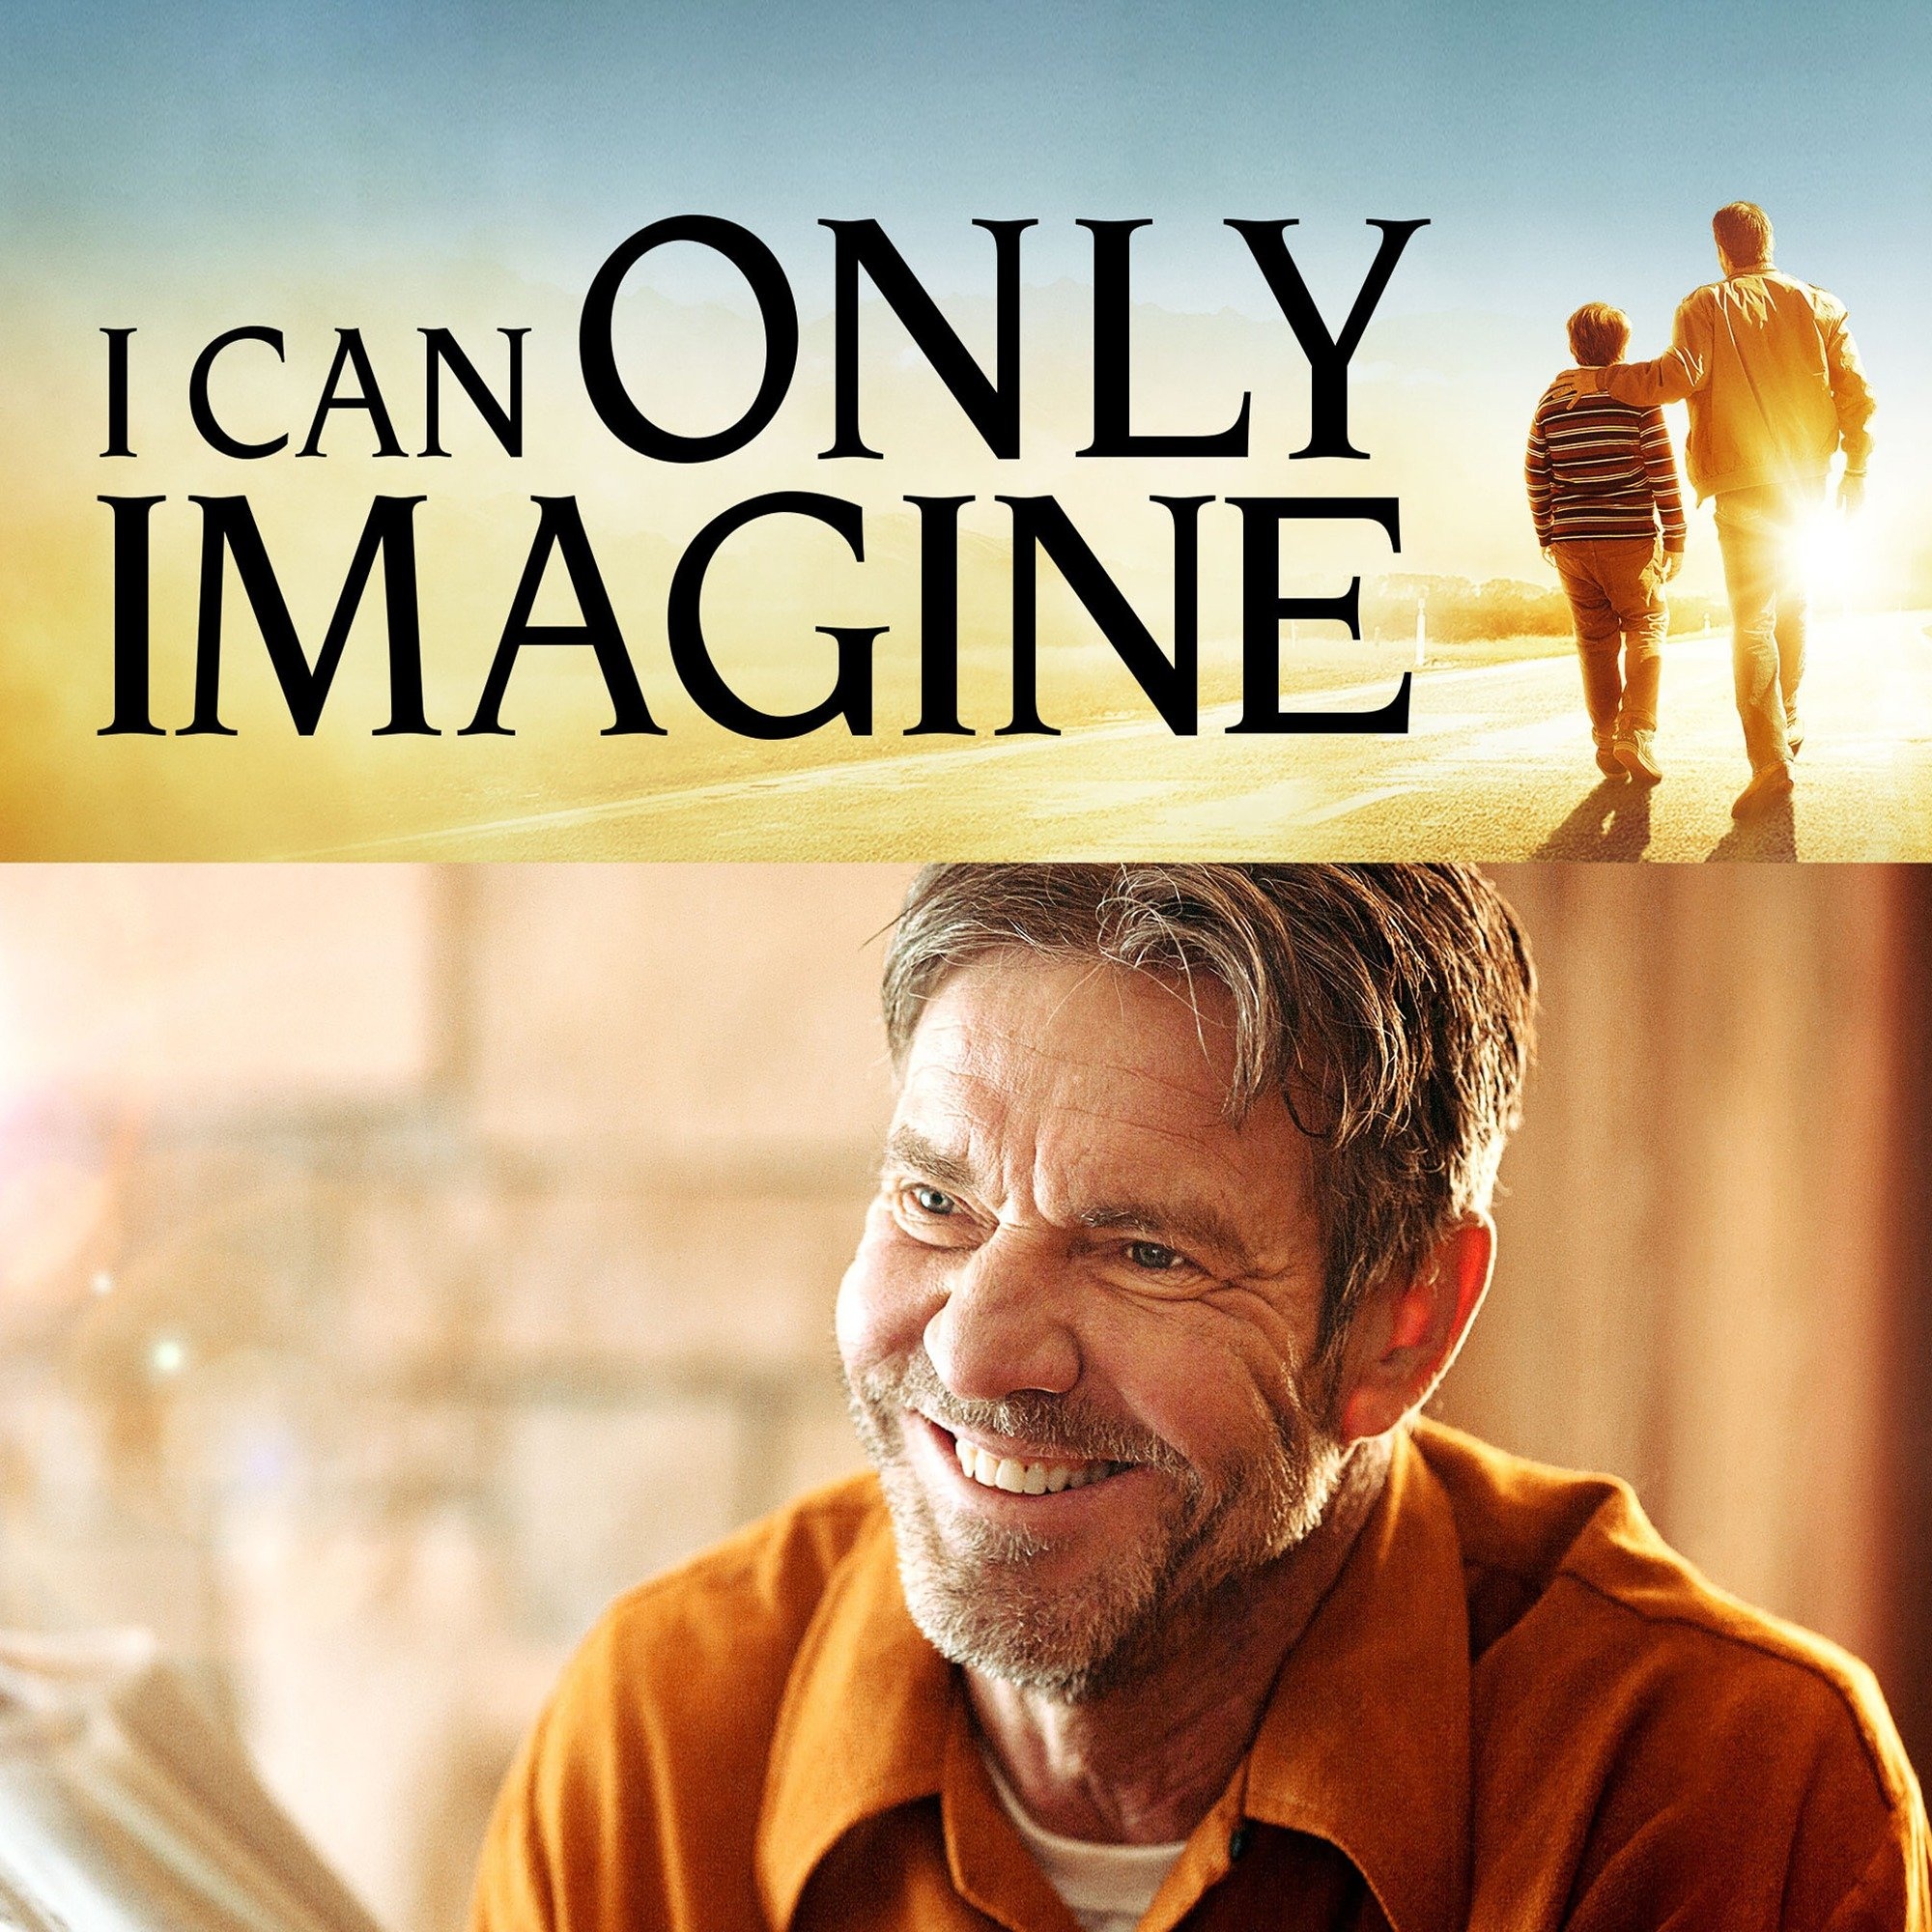 I Can Only Imagine Movie, Emotional story, Watch full movie, Powerful message, 2000x2000 HD Handy